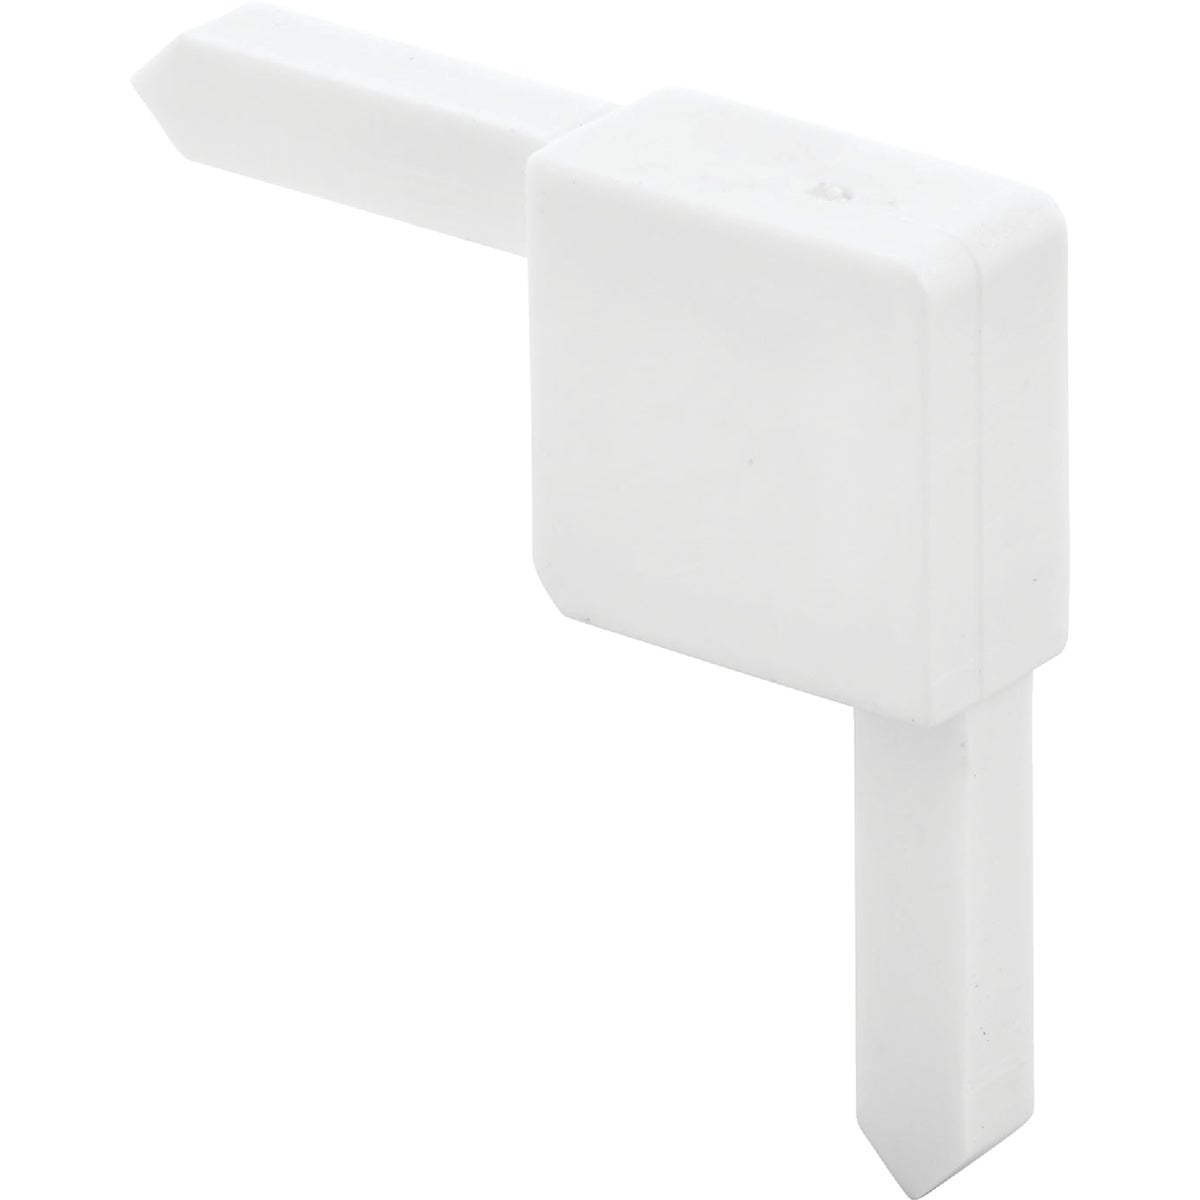 Item 261898, Plastic sash frame corners are designed to fit into square-cut ends of 